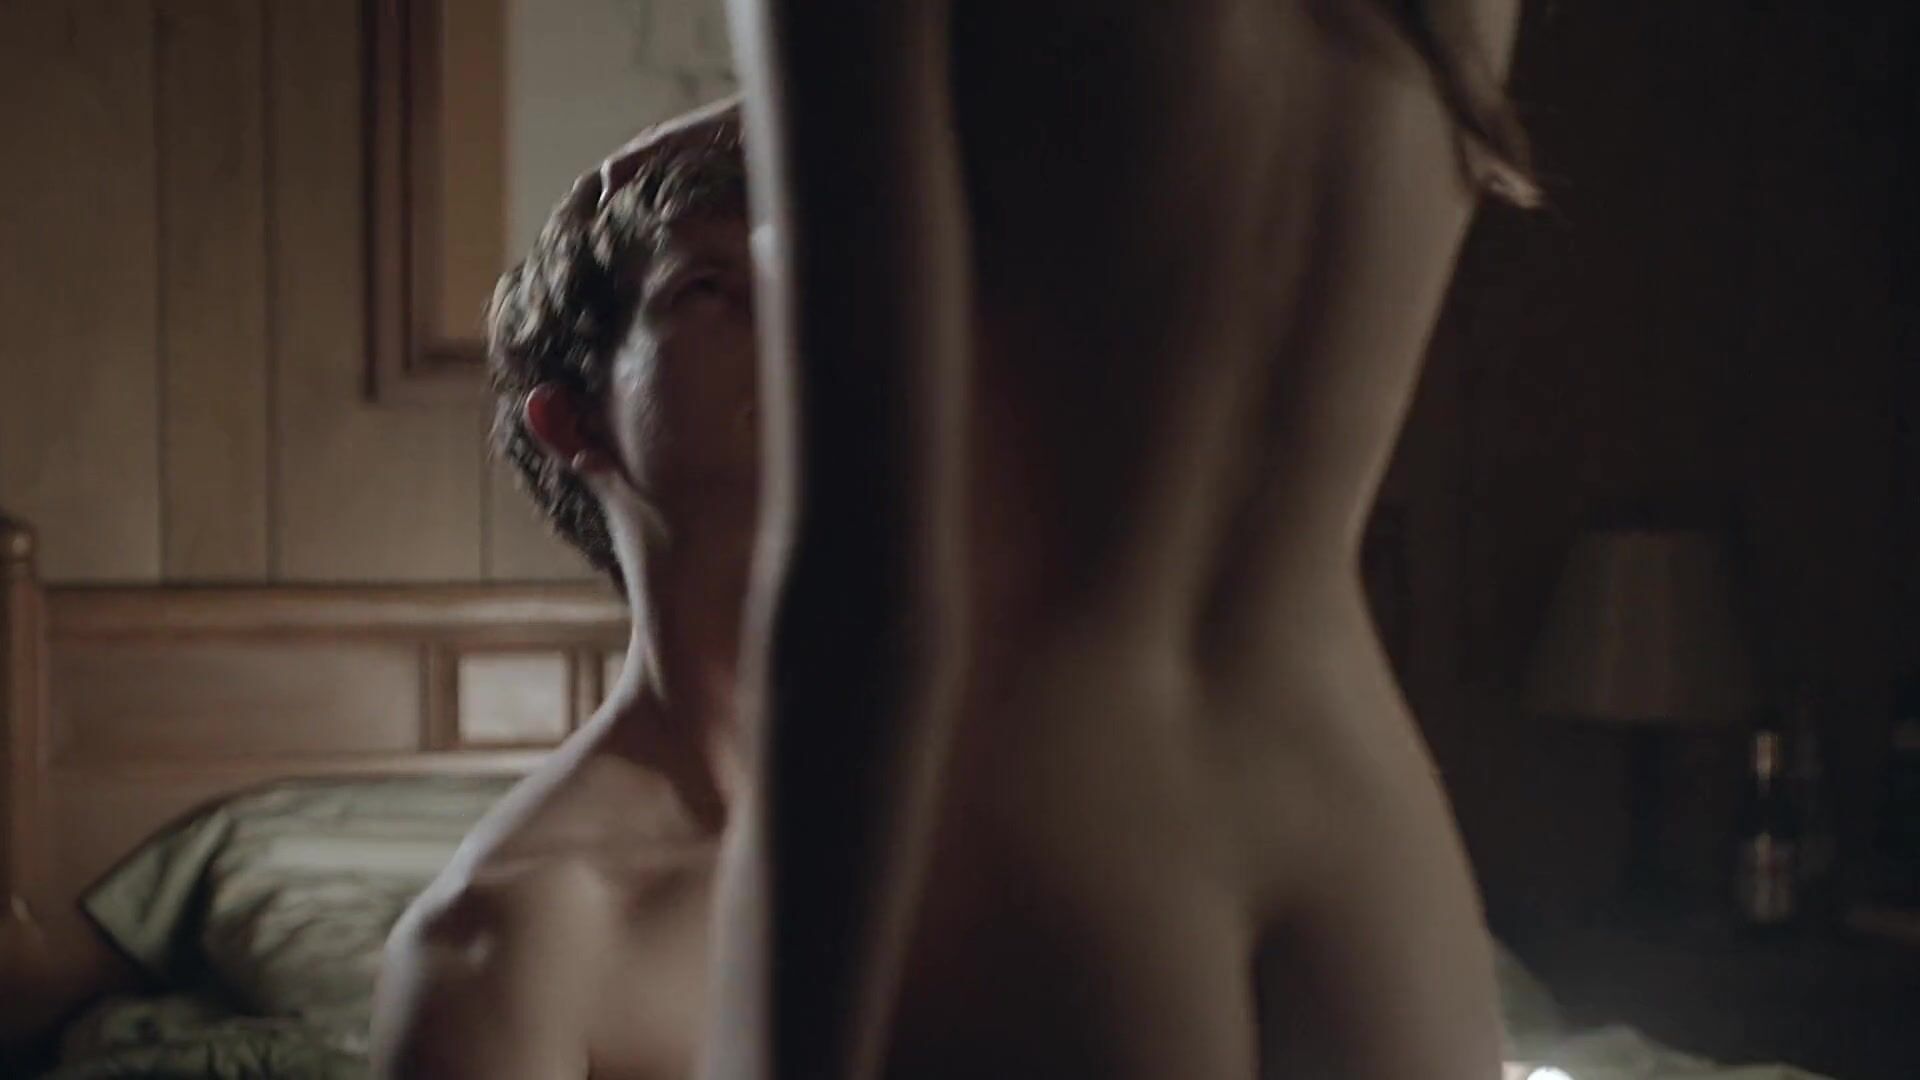 YouJizz Naked beauty Lili Simmons gets penetrated by the shy man in TV series Banshee S2 CamWhores